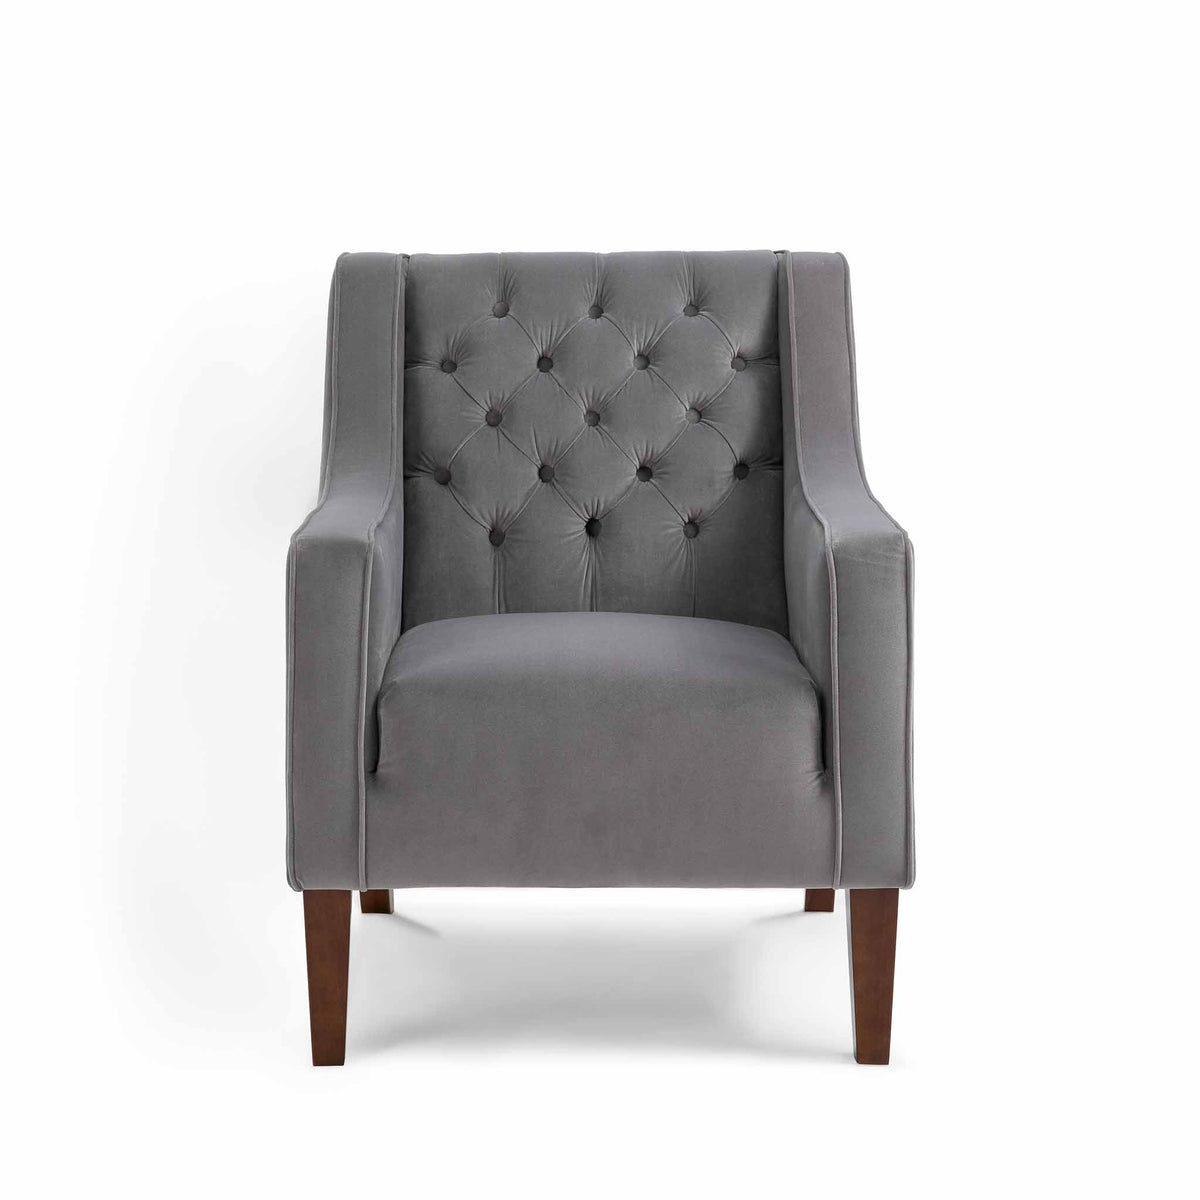 Eliza Grey Chesterfield Arm Chair by Roseland Furniture